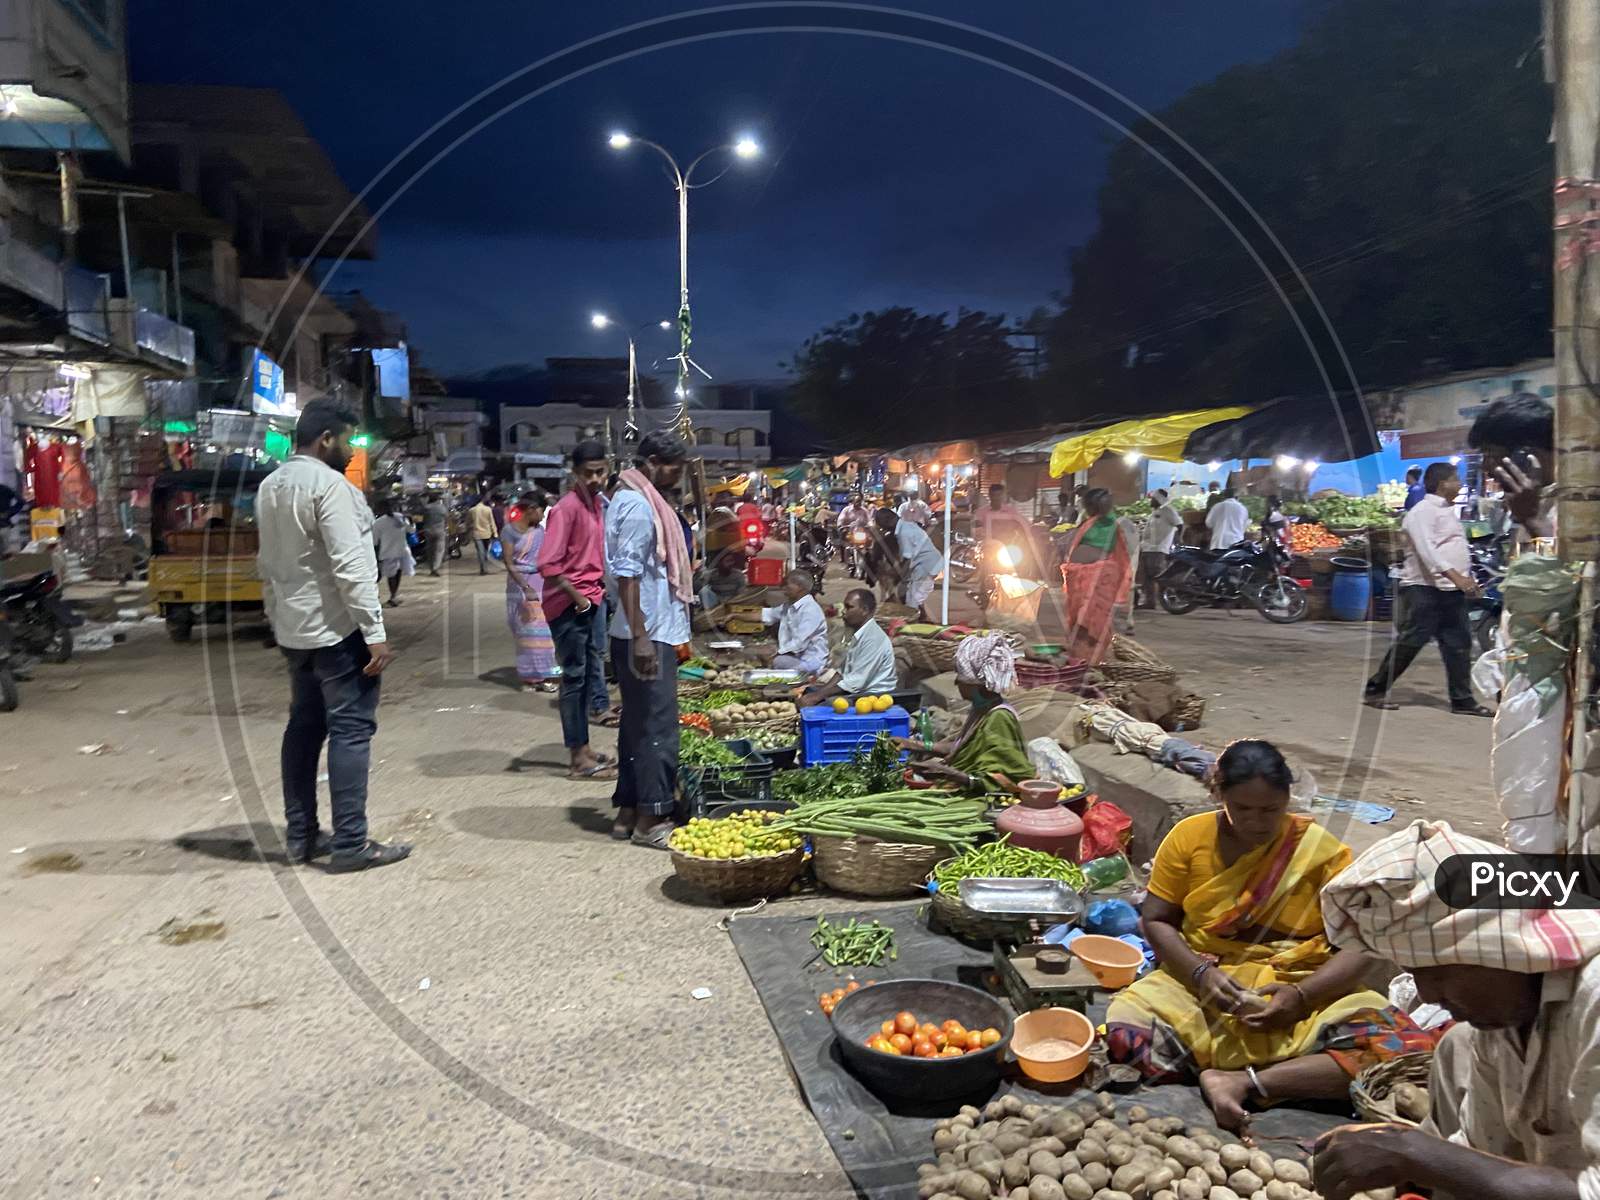 Vegetable vendors in a rural town.